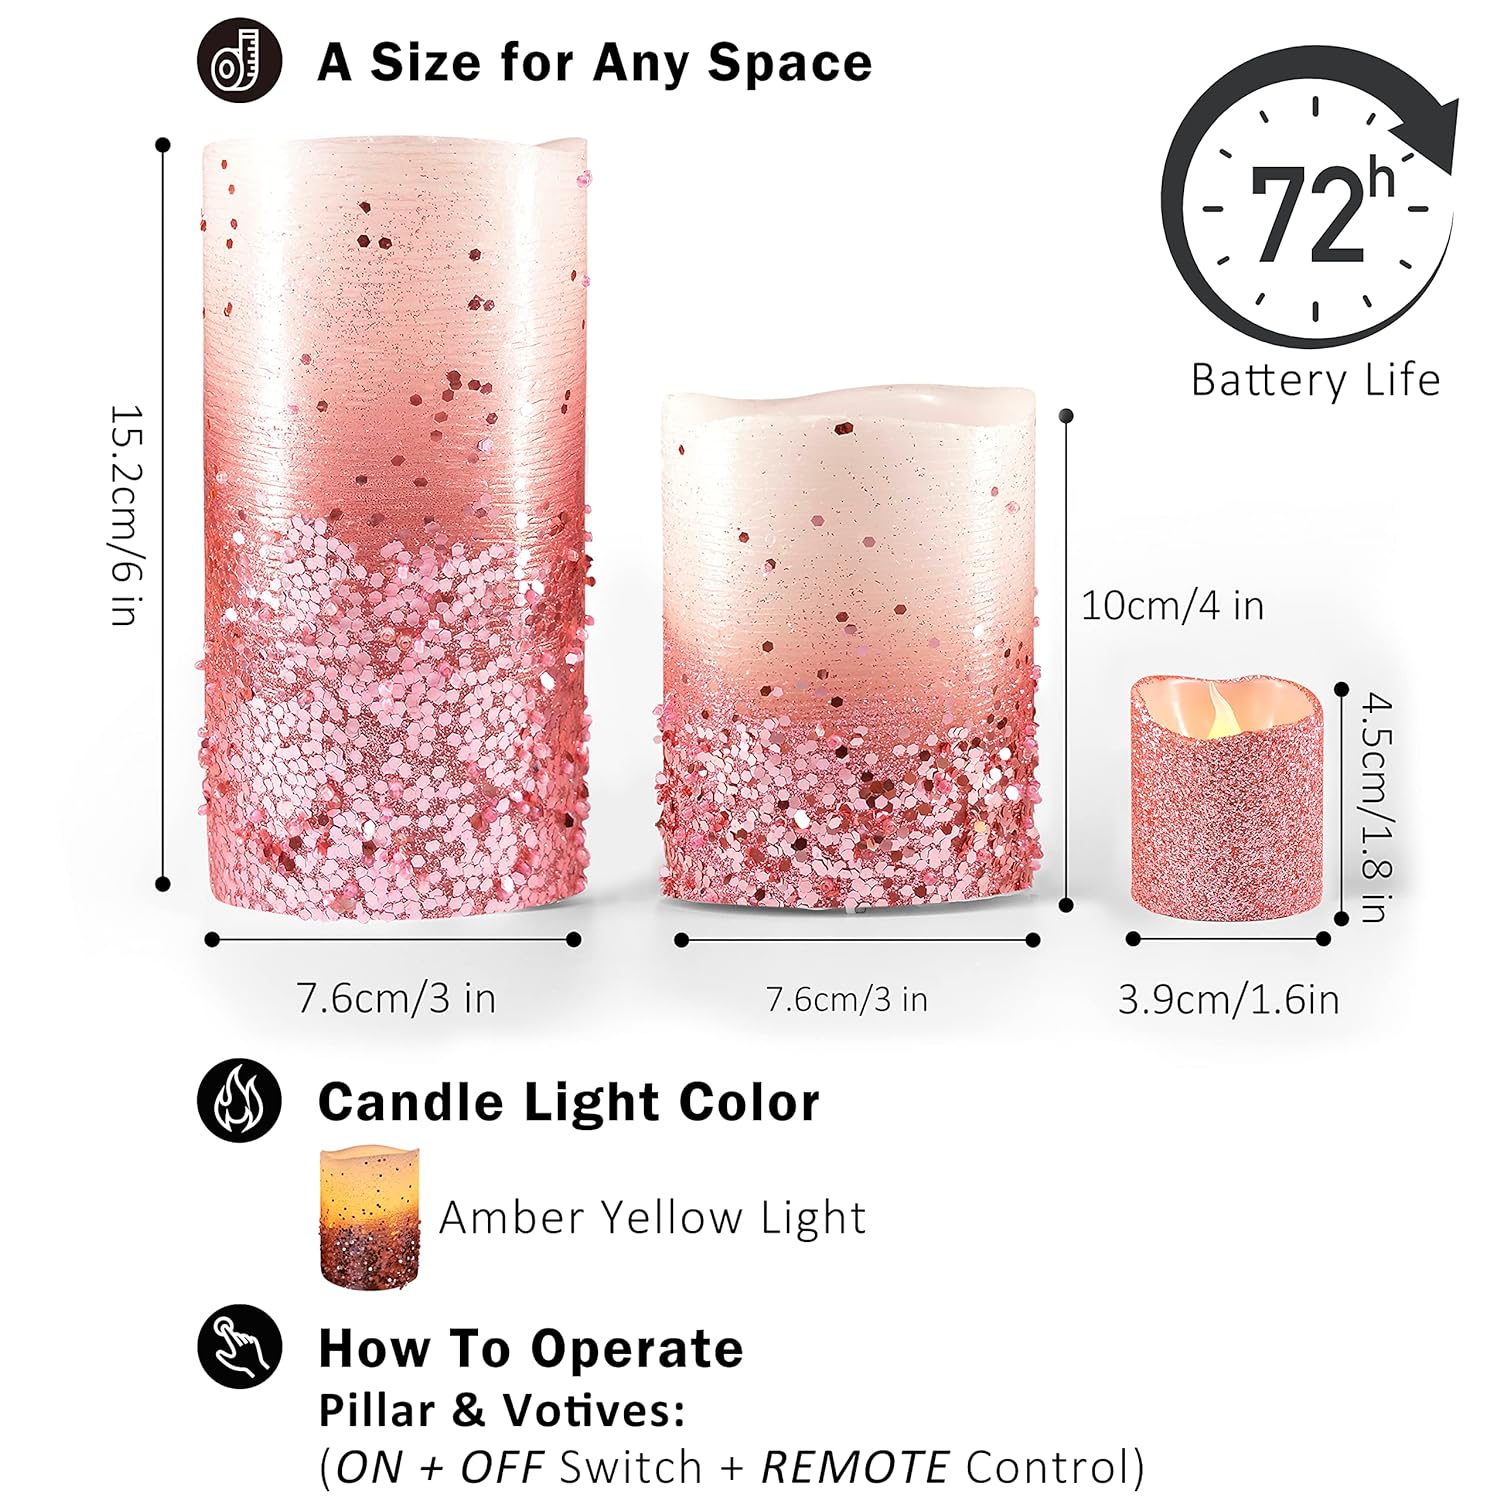 FURORA LIGHTING LED Flameless Candles with Remote – Battery-Operated Flameless Candles Bulk Set of 8 Fake Candles – Small Flameless Candles & Christmas Centerpieces for Tables, Rose Gold Glittery